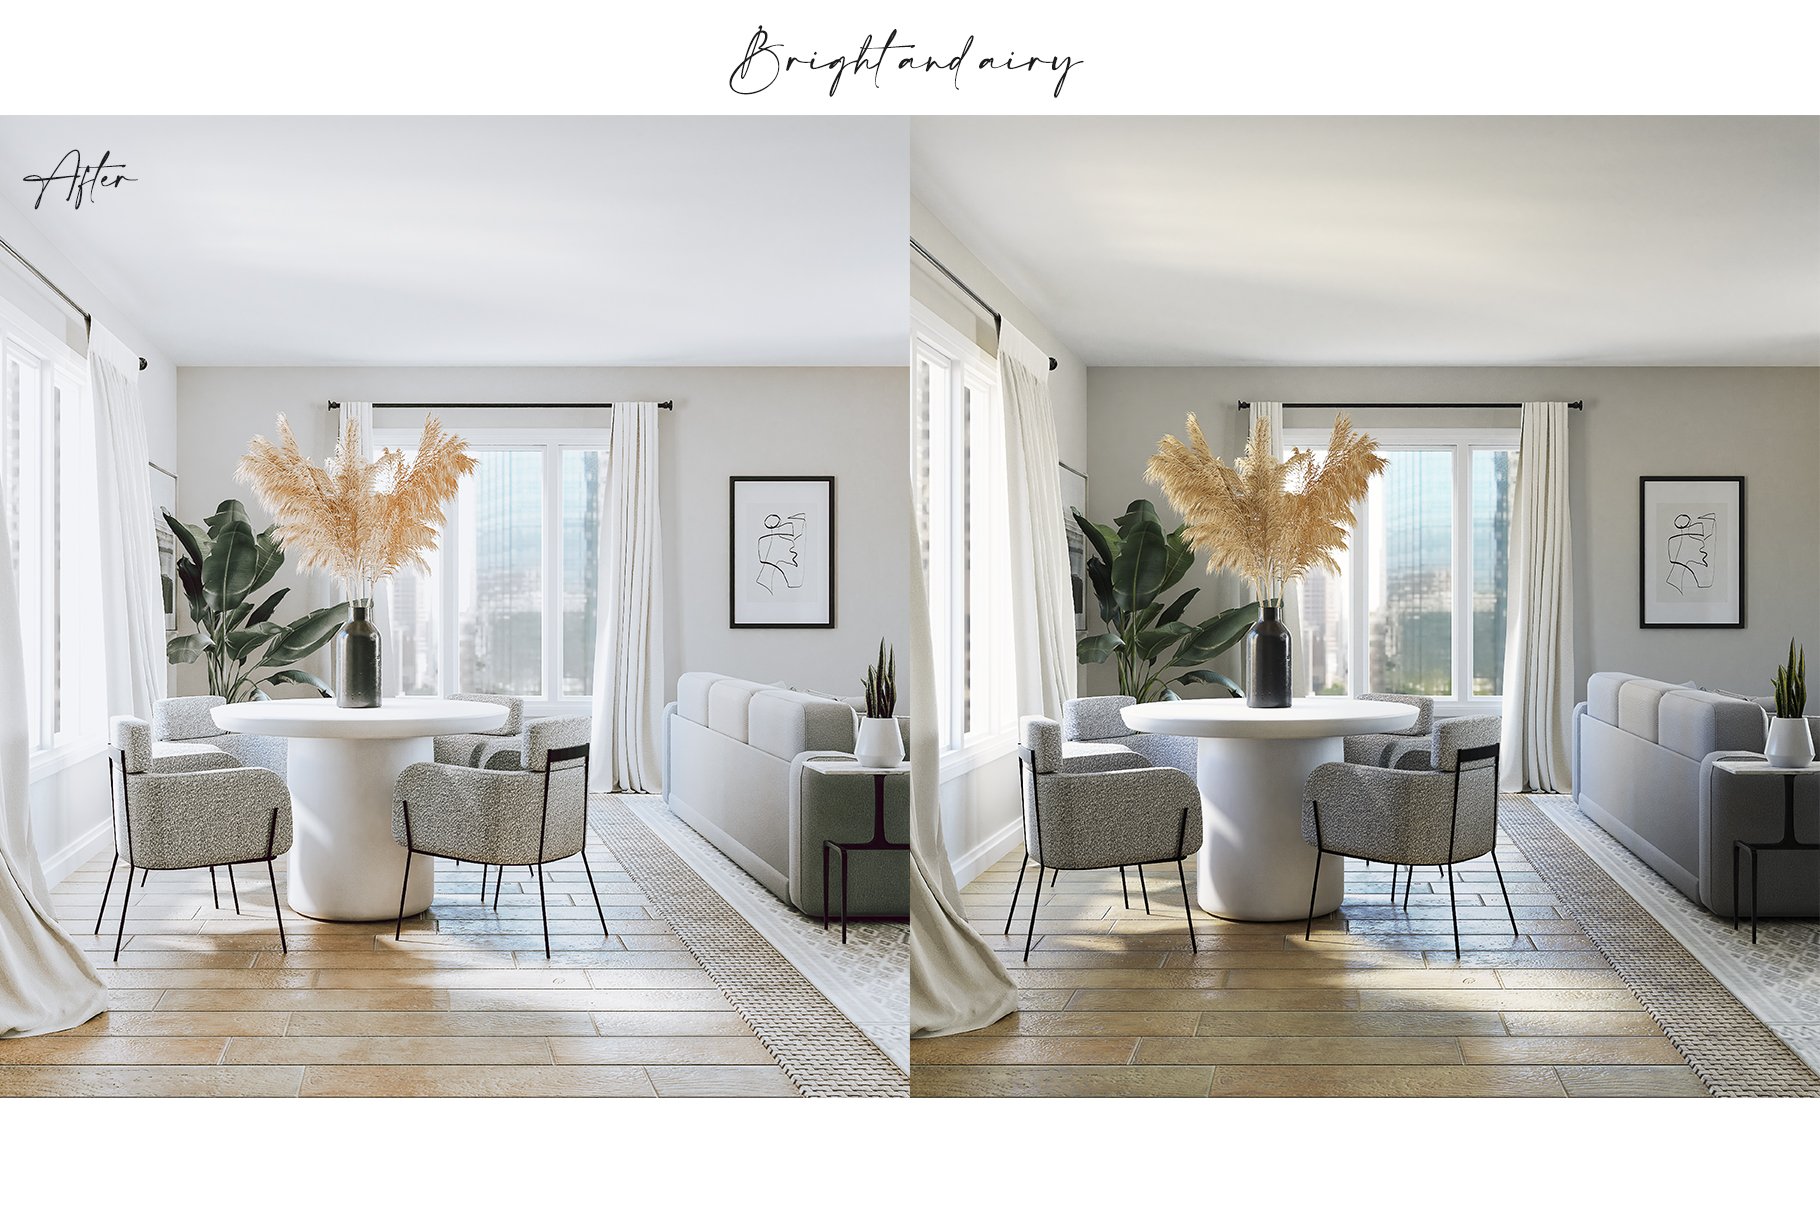 home decor lightroom presets bright and airy 295